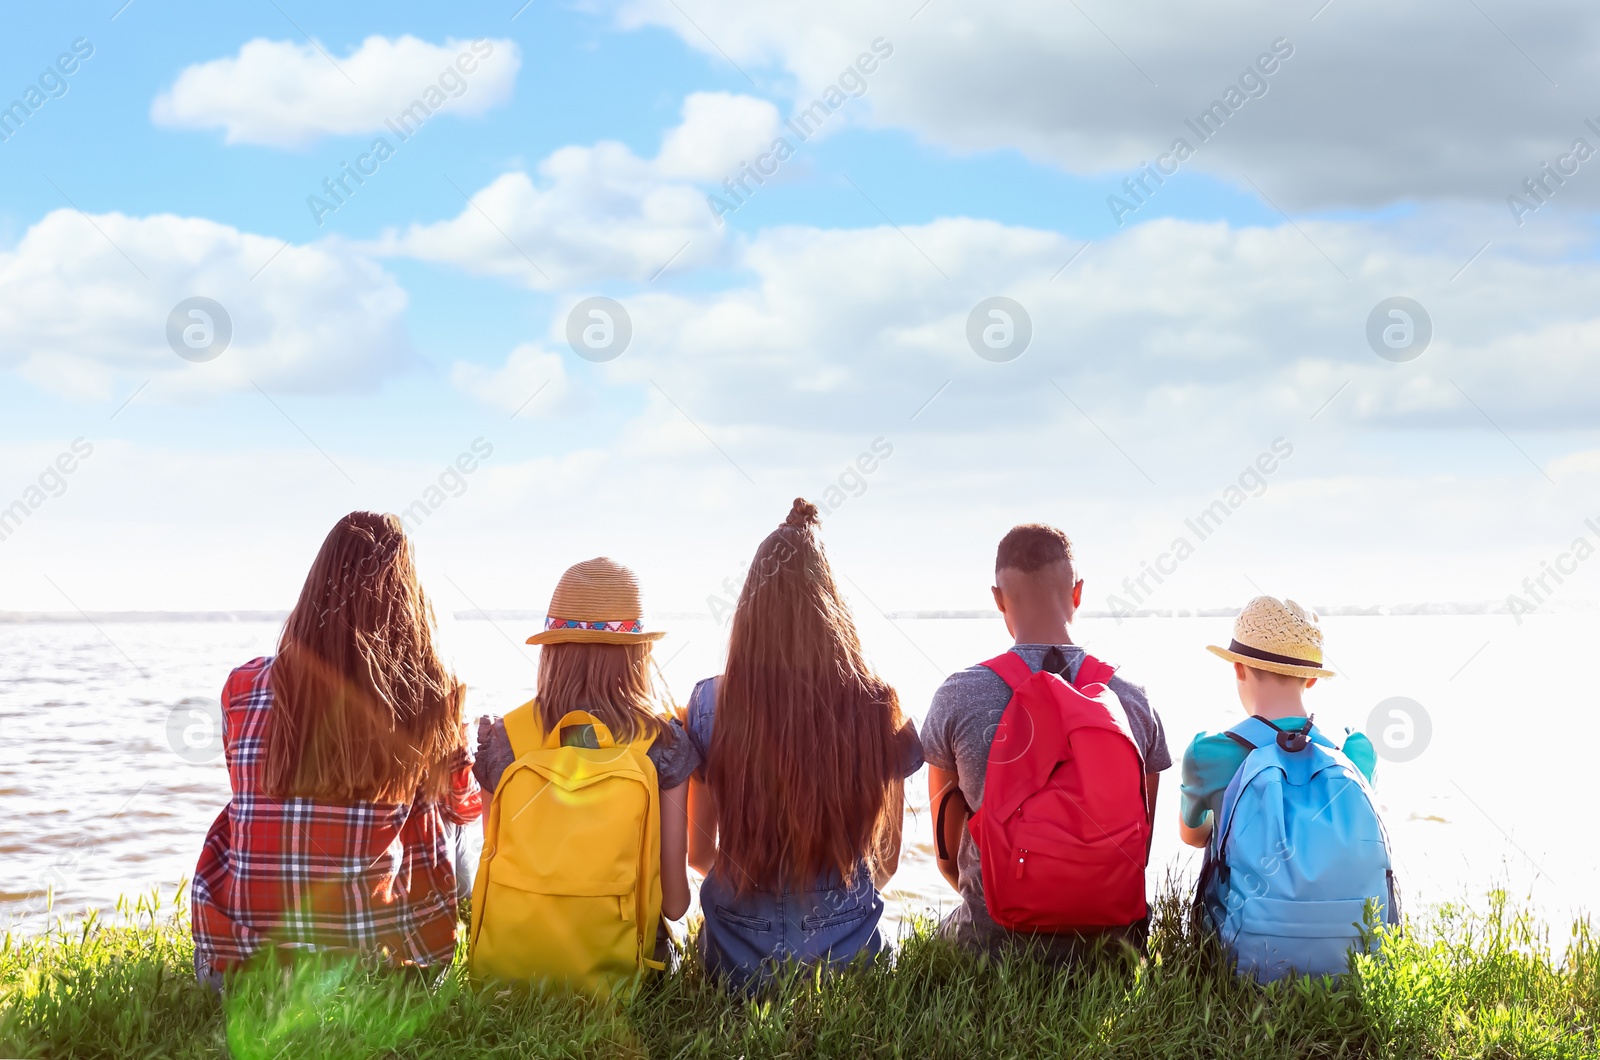 Image of School holidays. Group of children sitting on green grass near river 